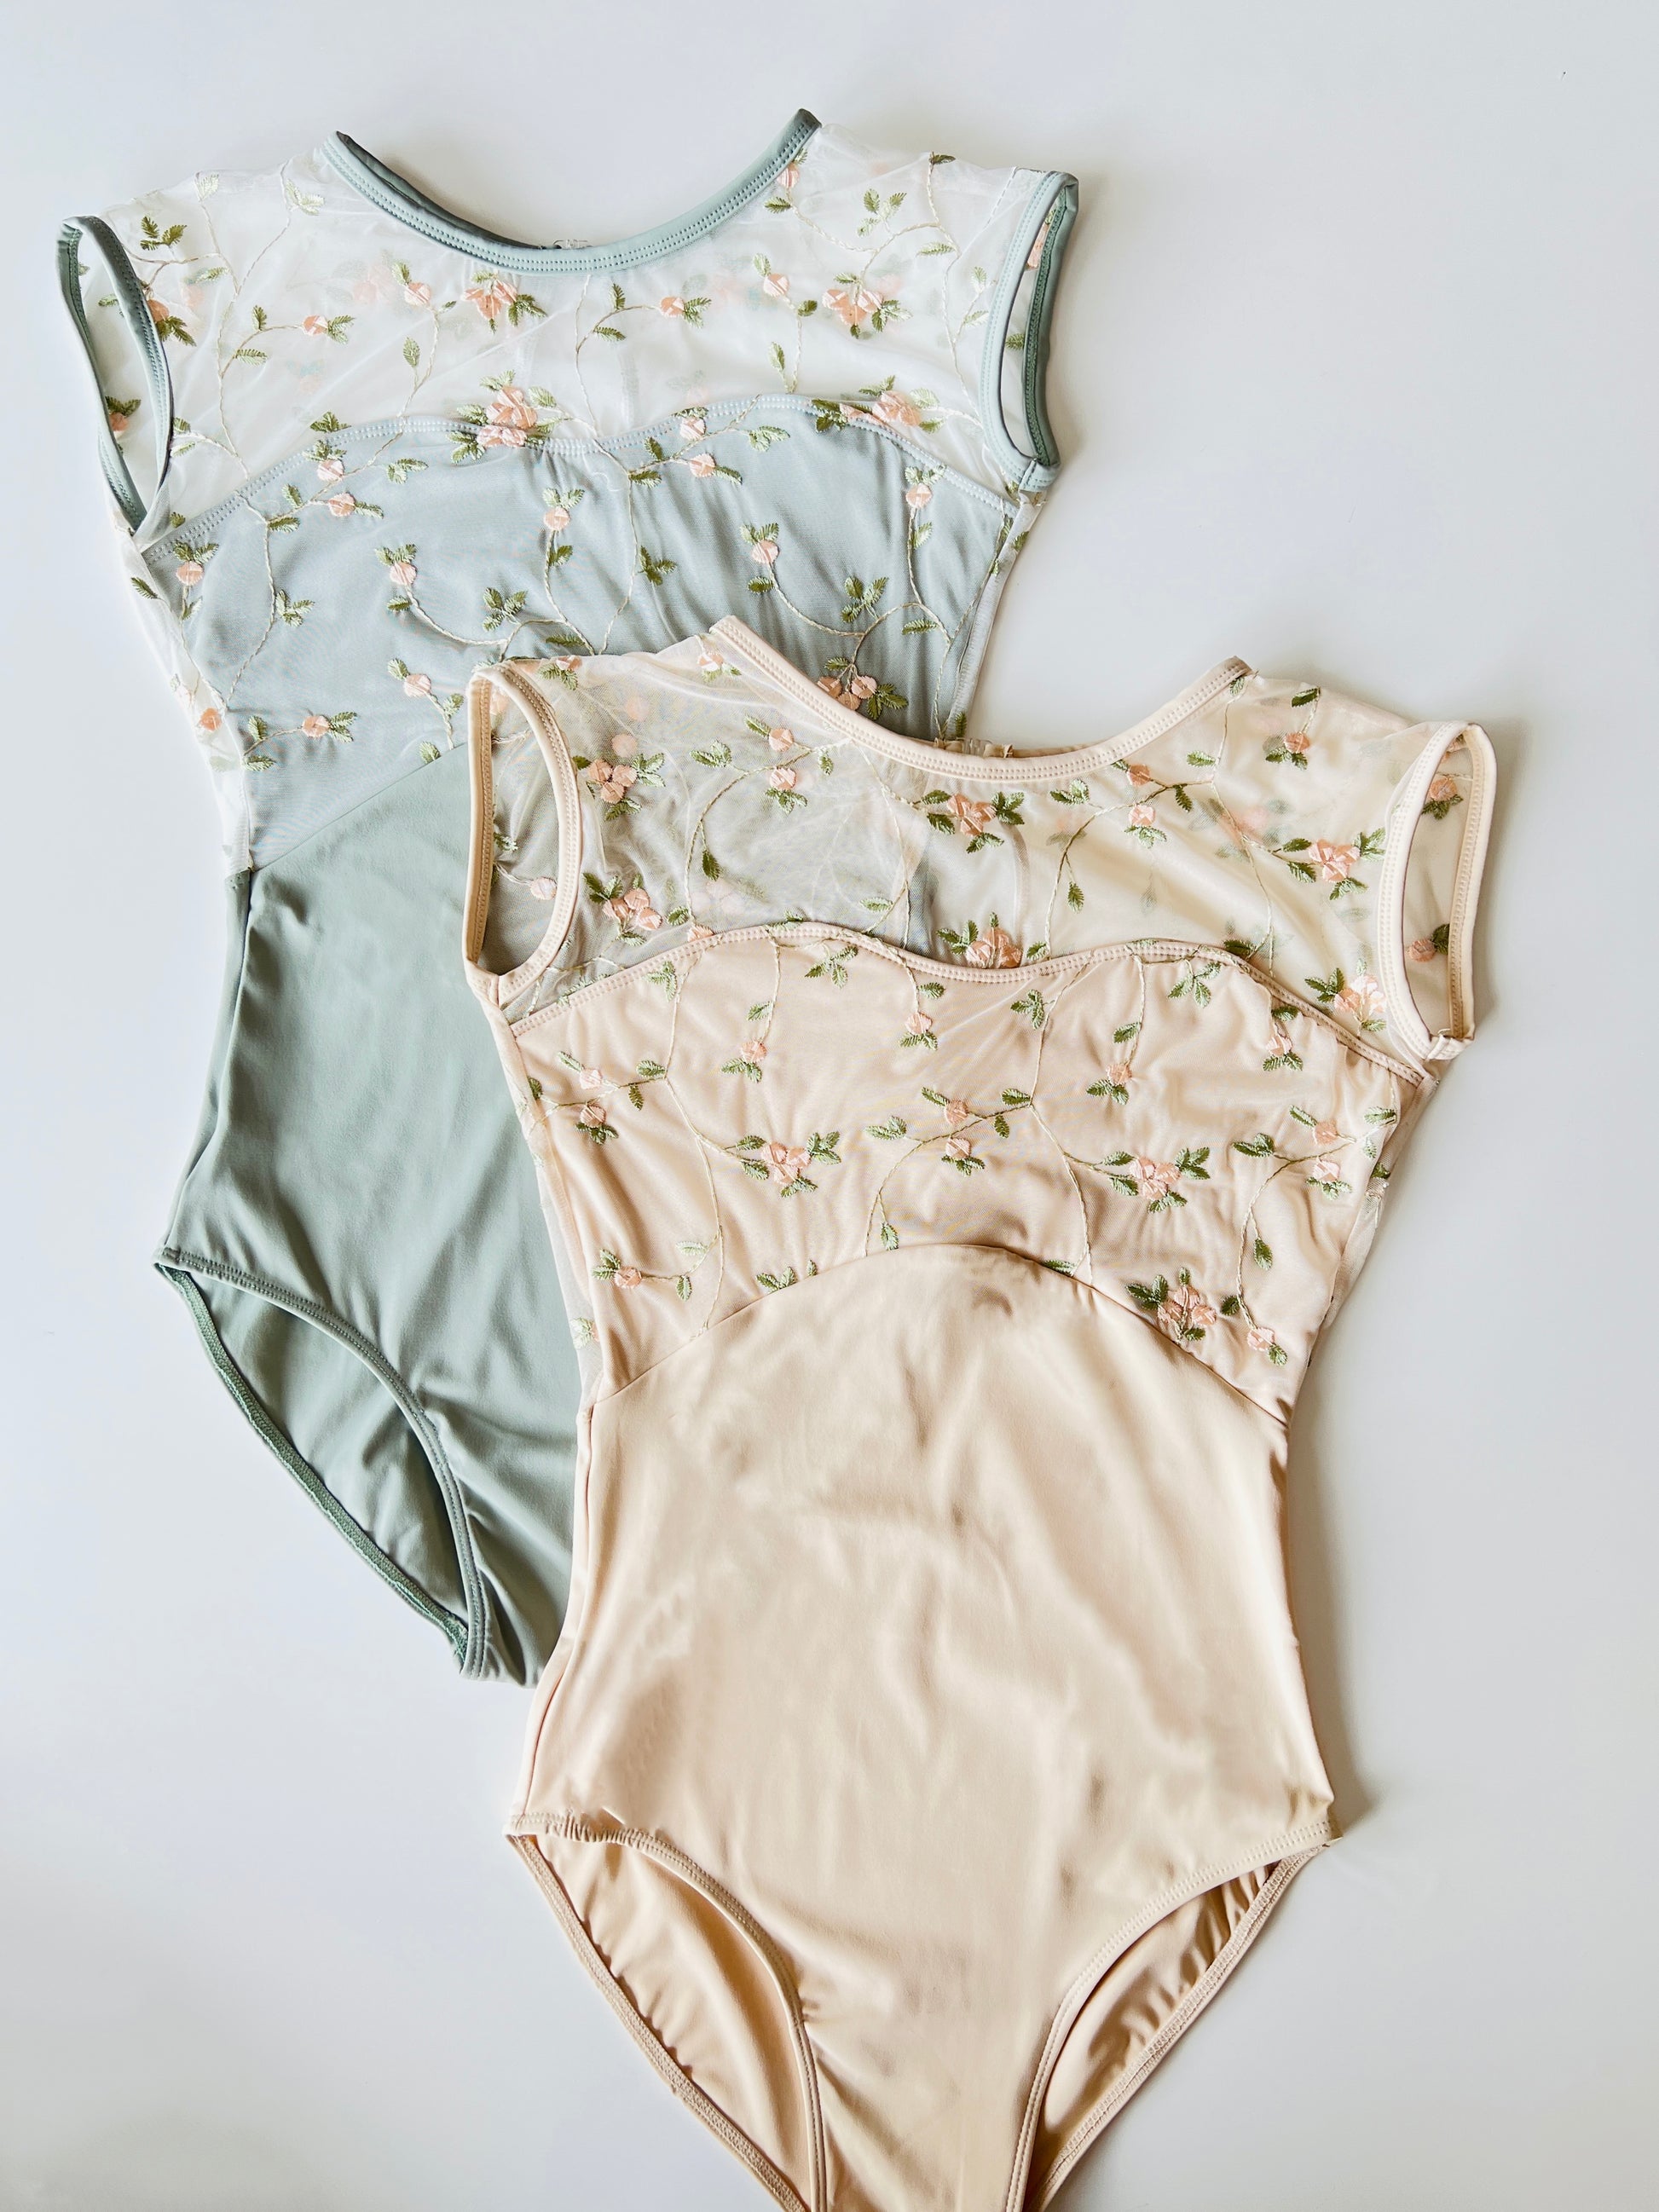 Rose Embroidered Cap Sleeve Ballet Dance Leotard - Sage From The Collective Dancewear